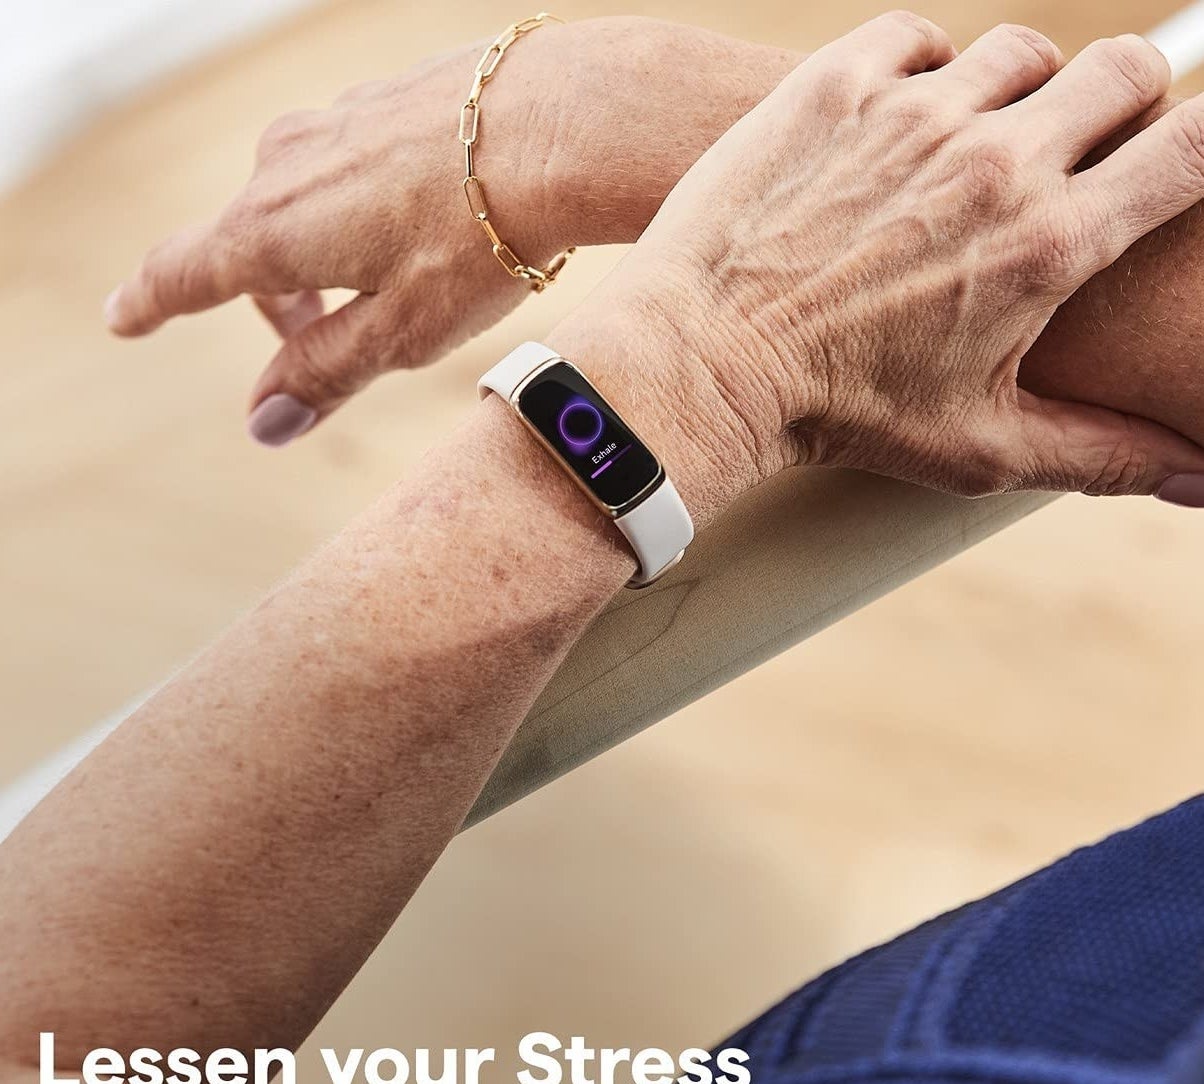 someone wearing the fitbit on one wrist and a bracelet on the other